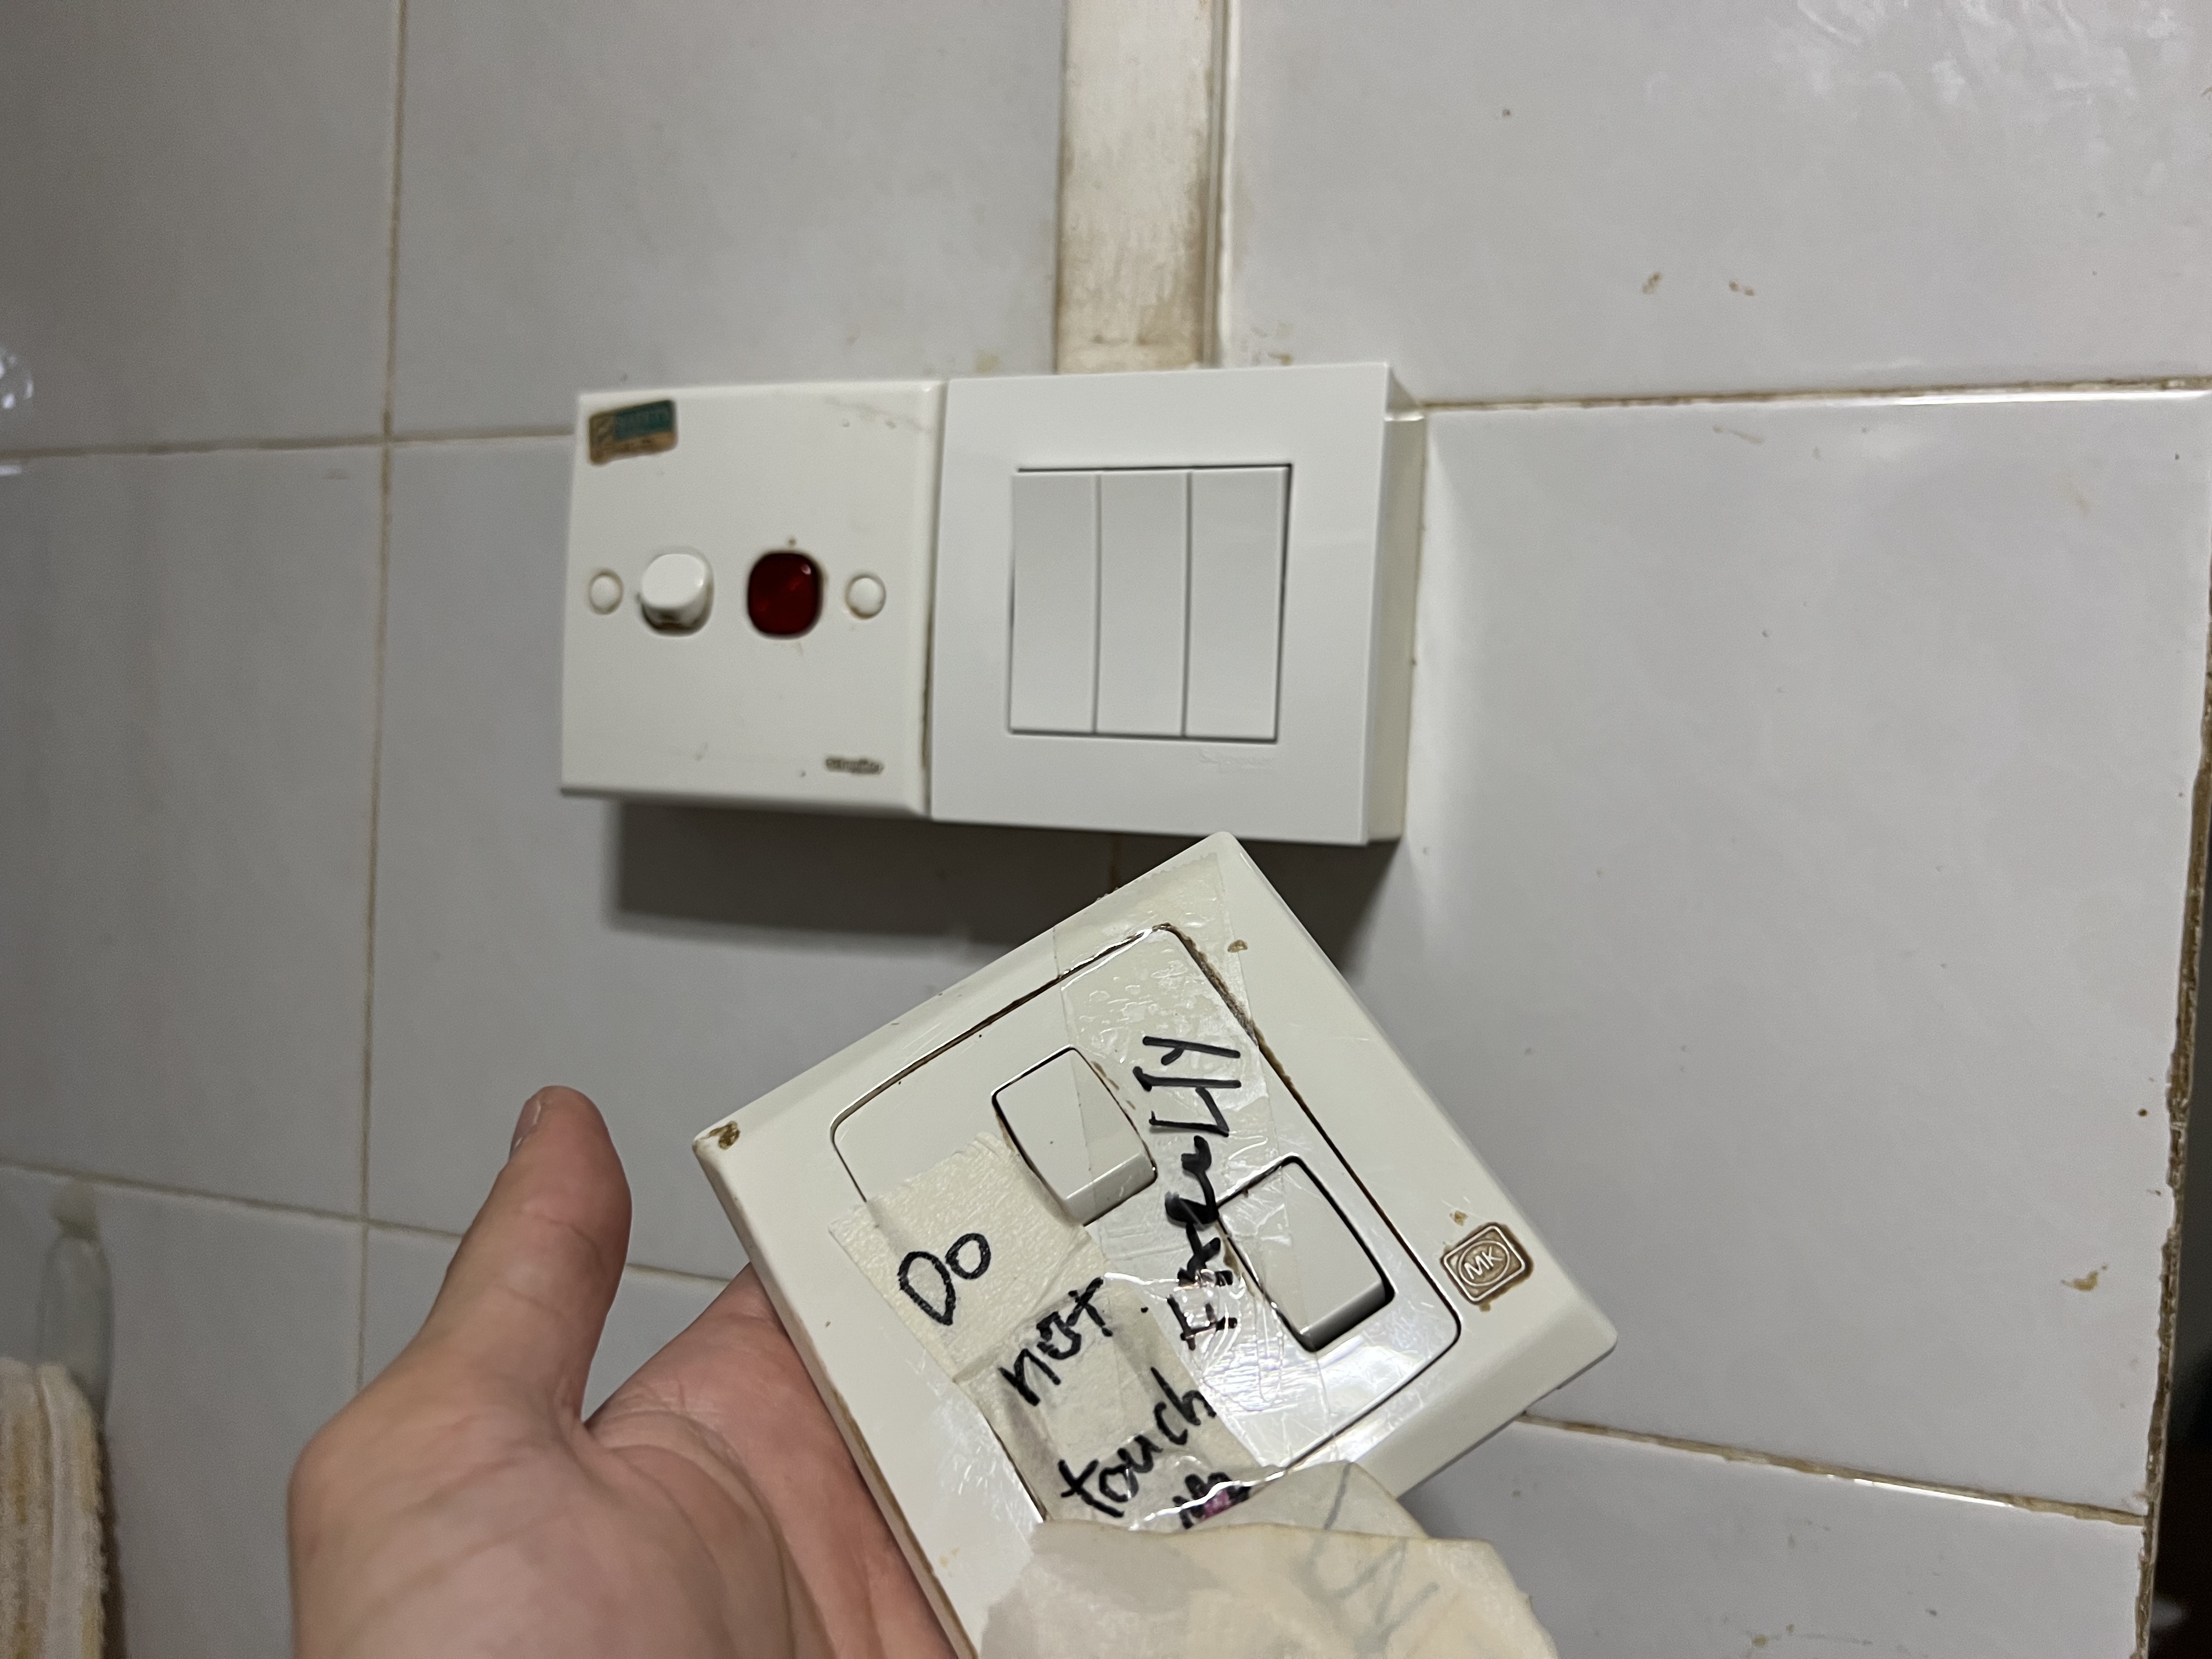 A switch that was causing a circuit breaker to trip